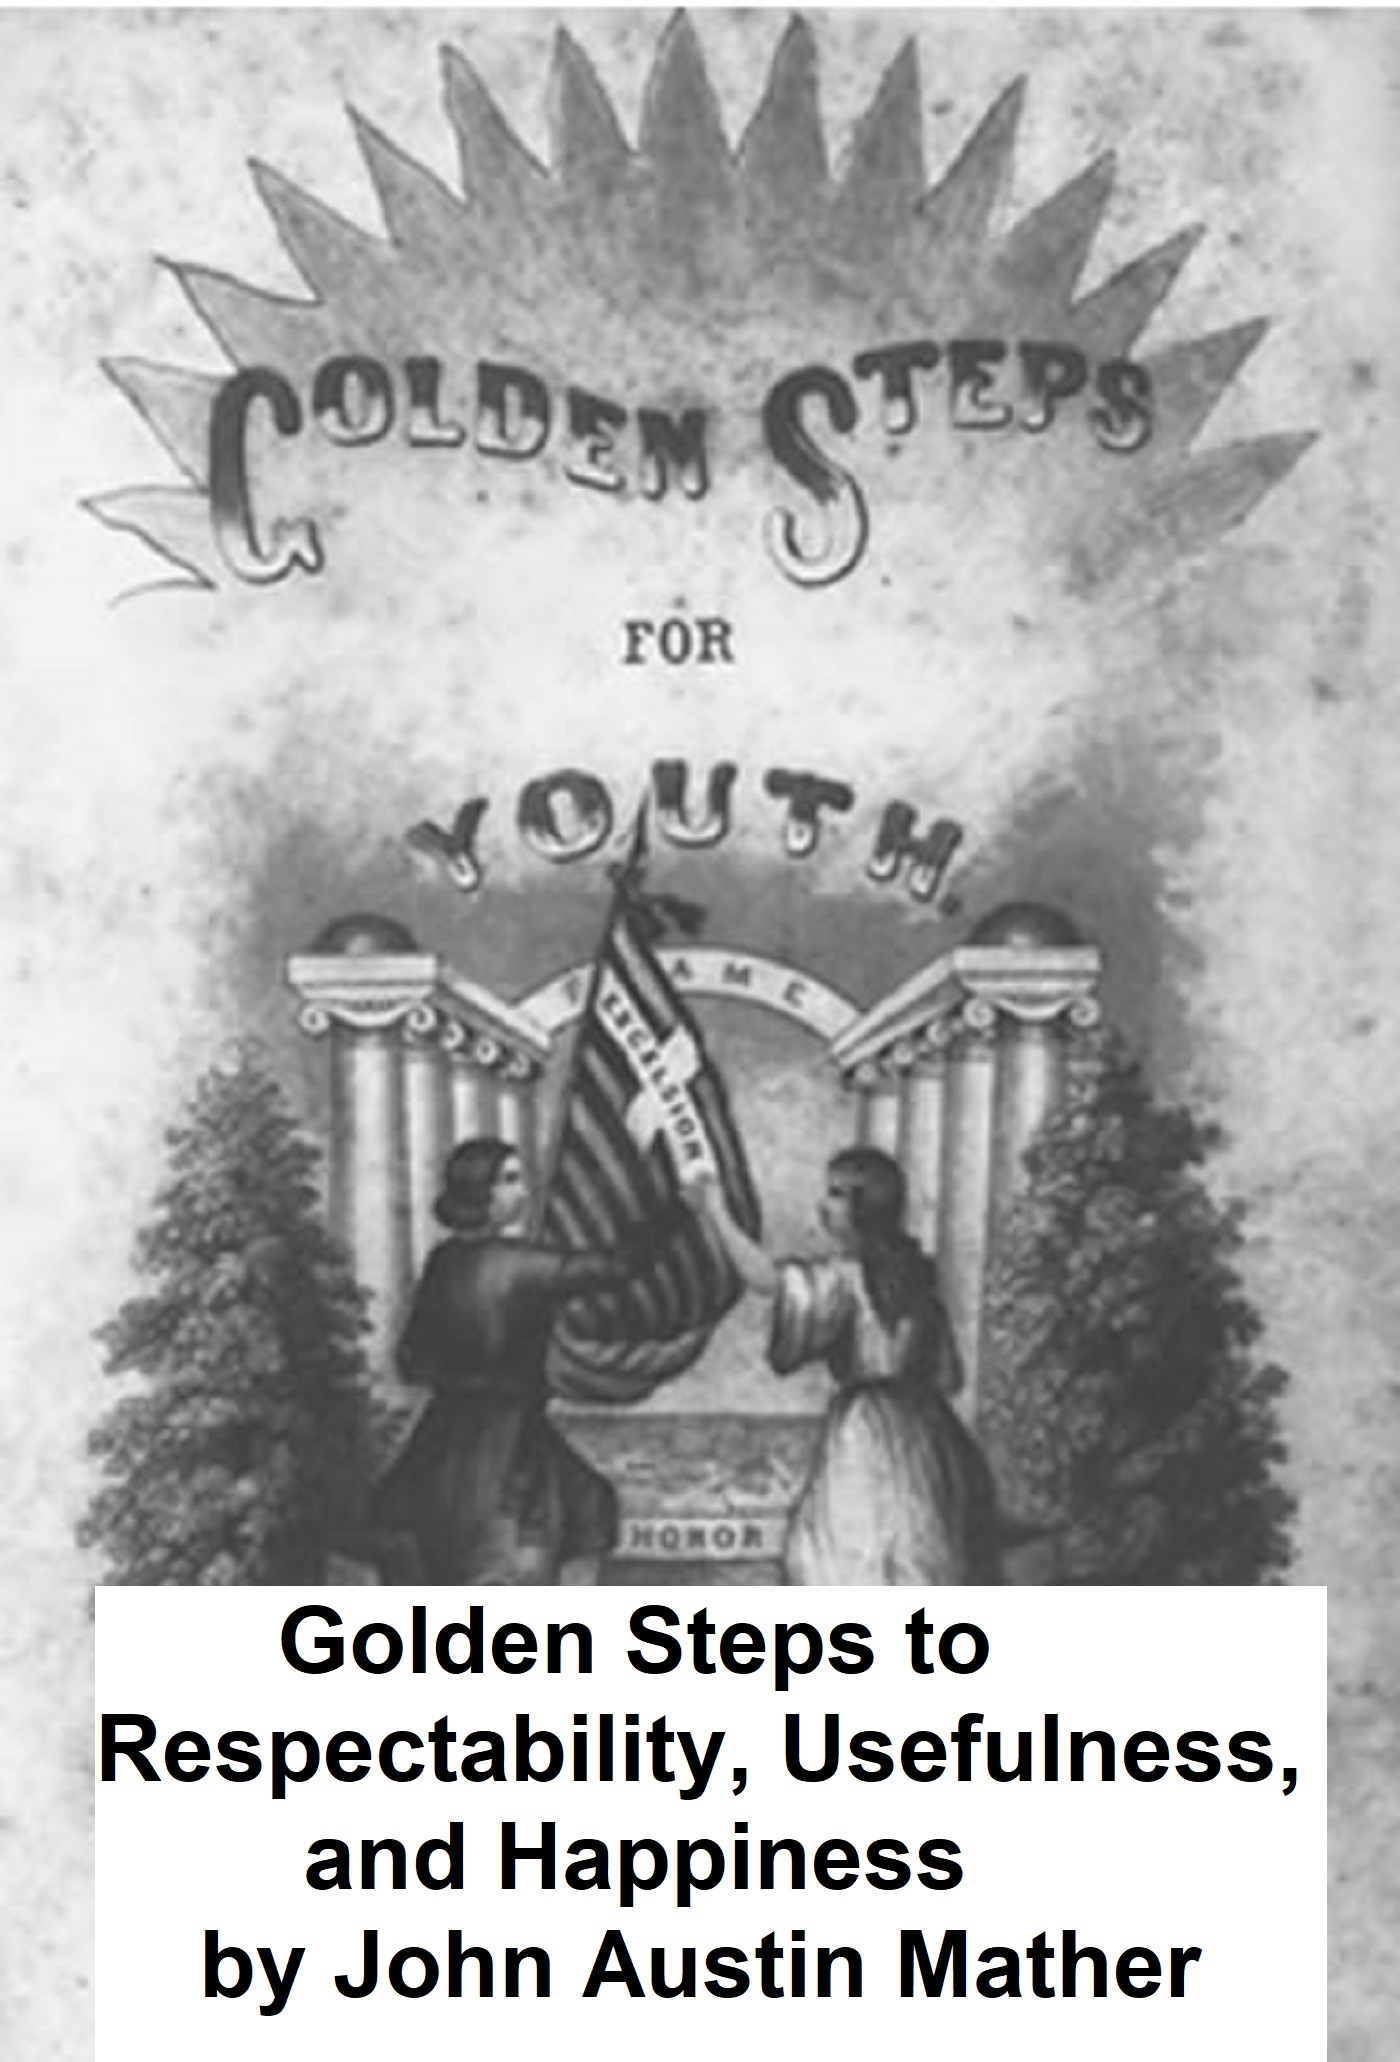 Golden Steps to Respectability